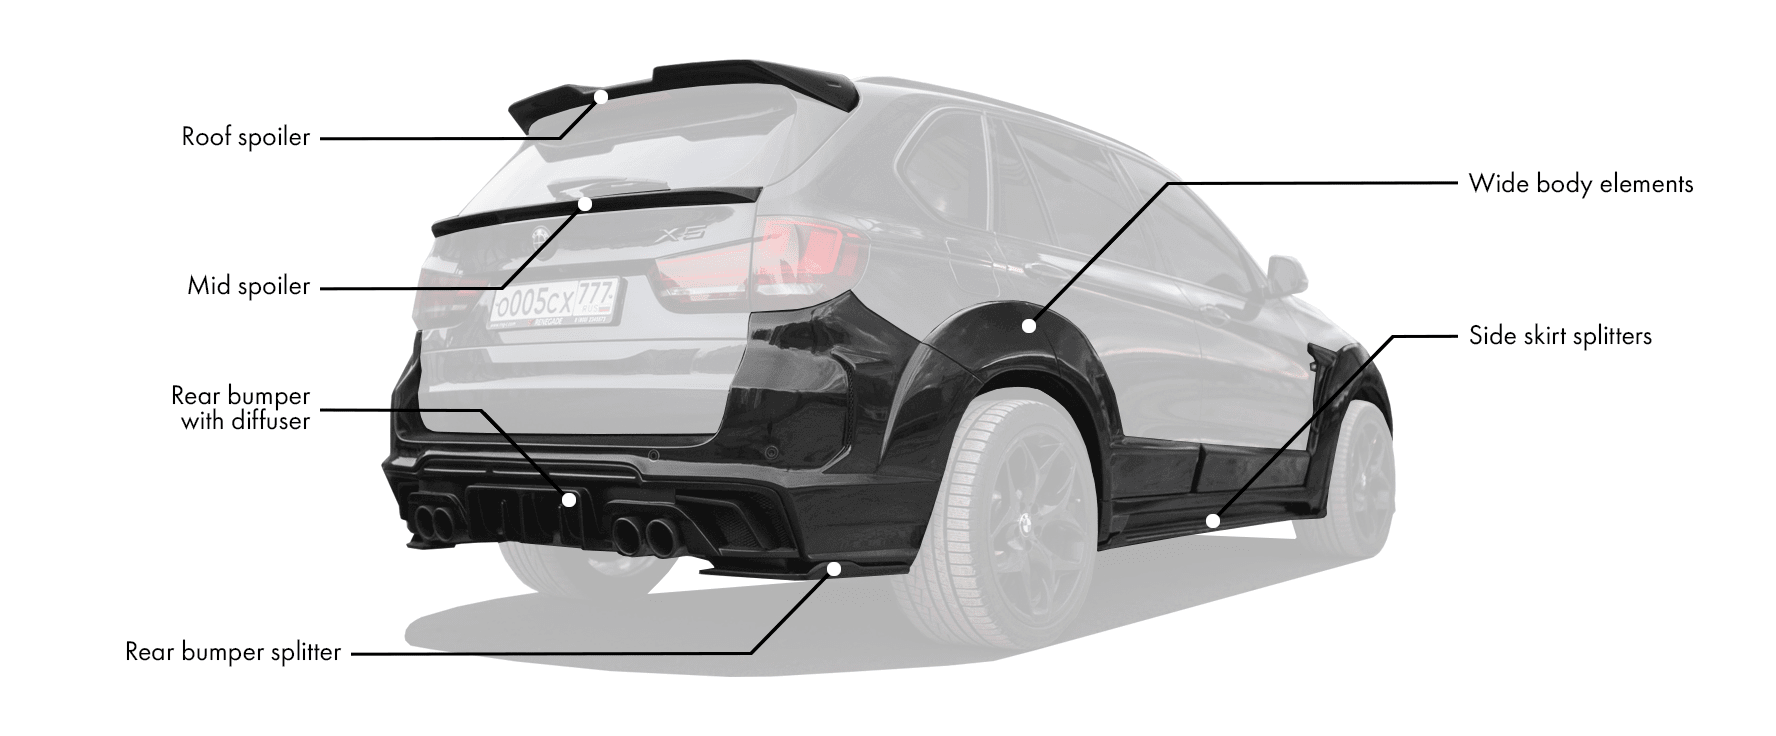 Full body kit for BMW X5 F15 includes